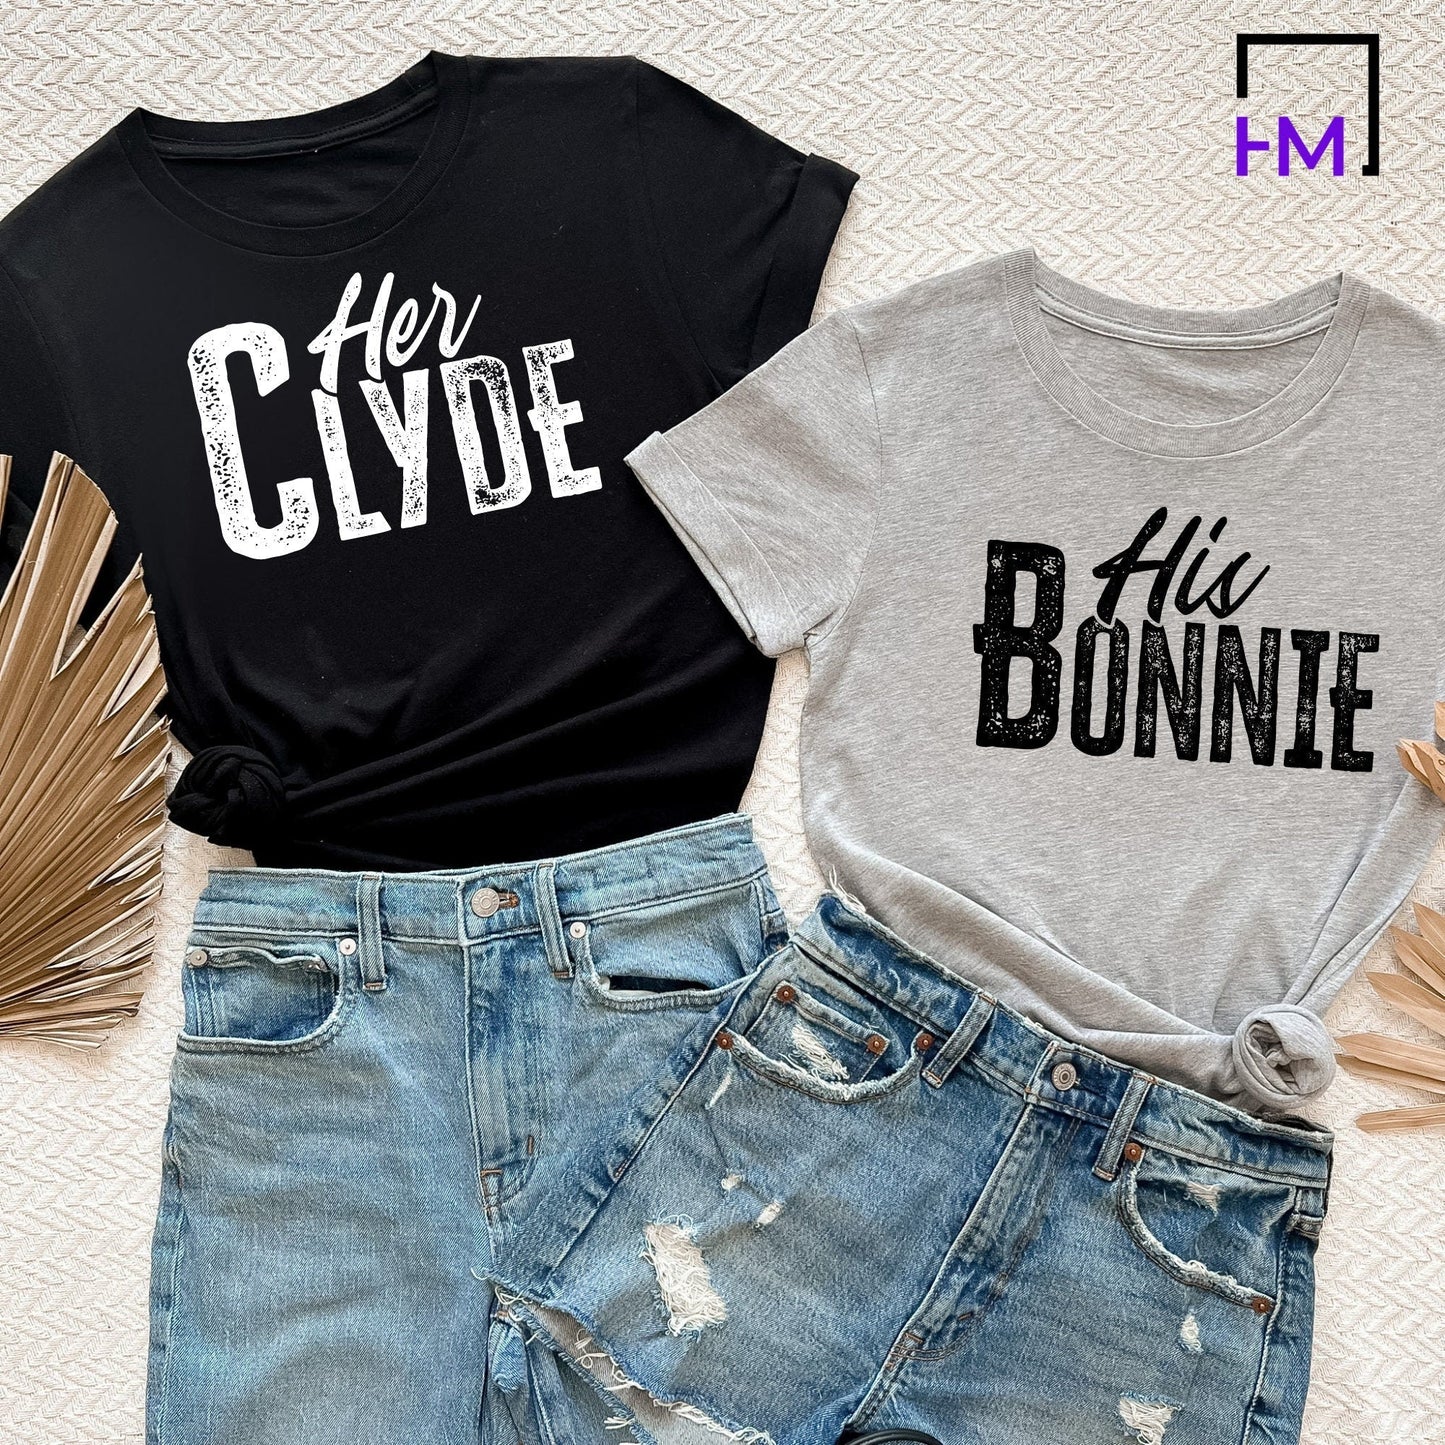 Funny Couples Shirts, Bonnie Clyde Gift for boyfriend, Wife, Husband, Engagement Announcement, Cute Couples Sweater/Hoodie, Wedding Present